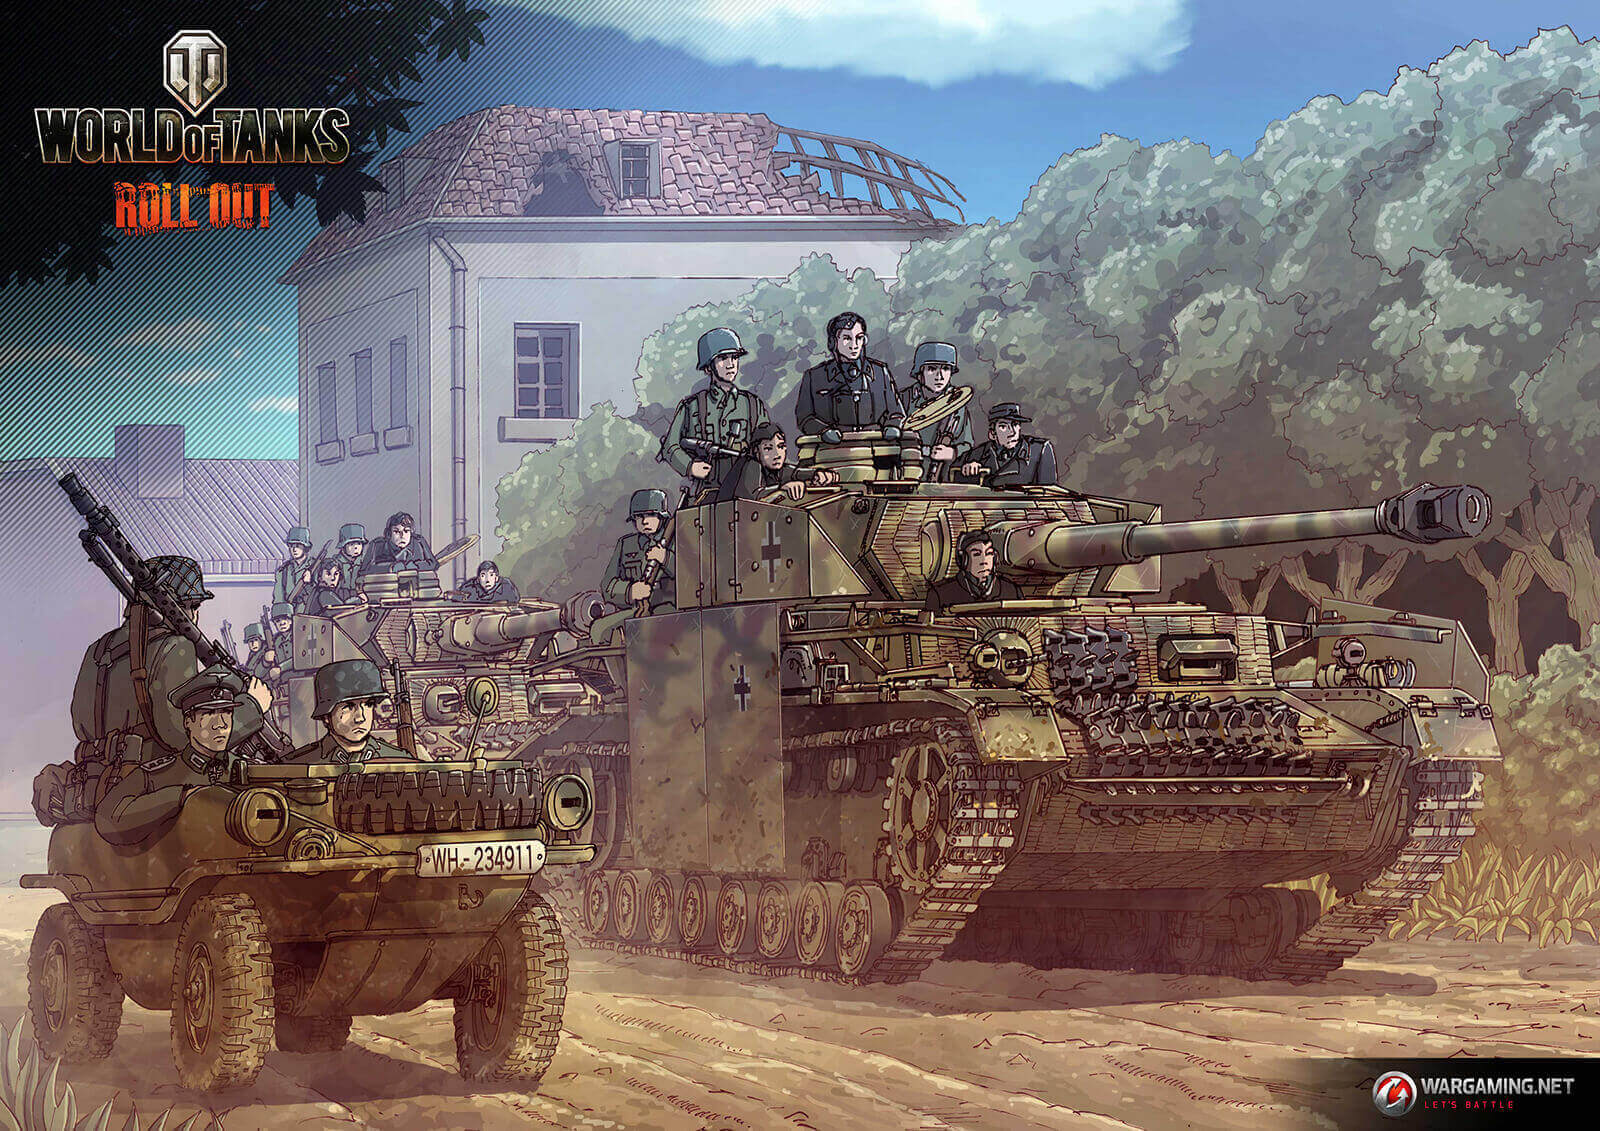 The Final Batch of Awesome WoT Anime Wallpapers – The Armored Patrol